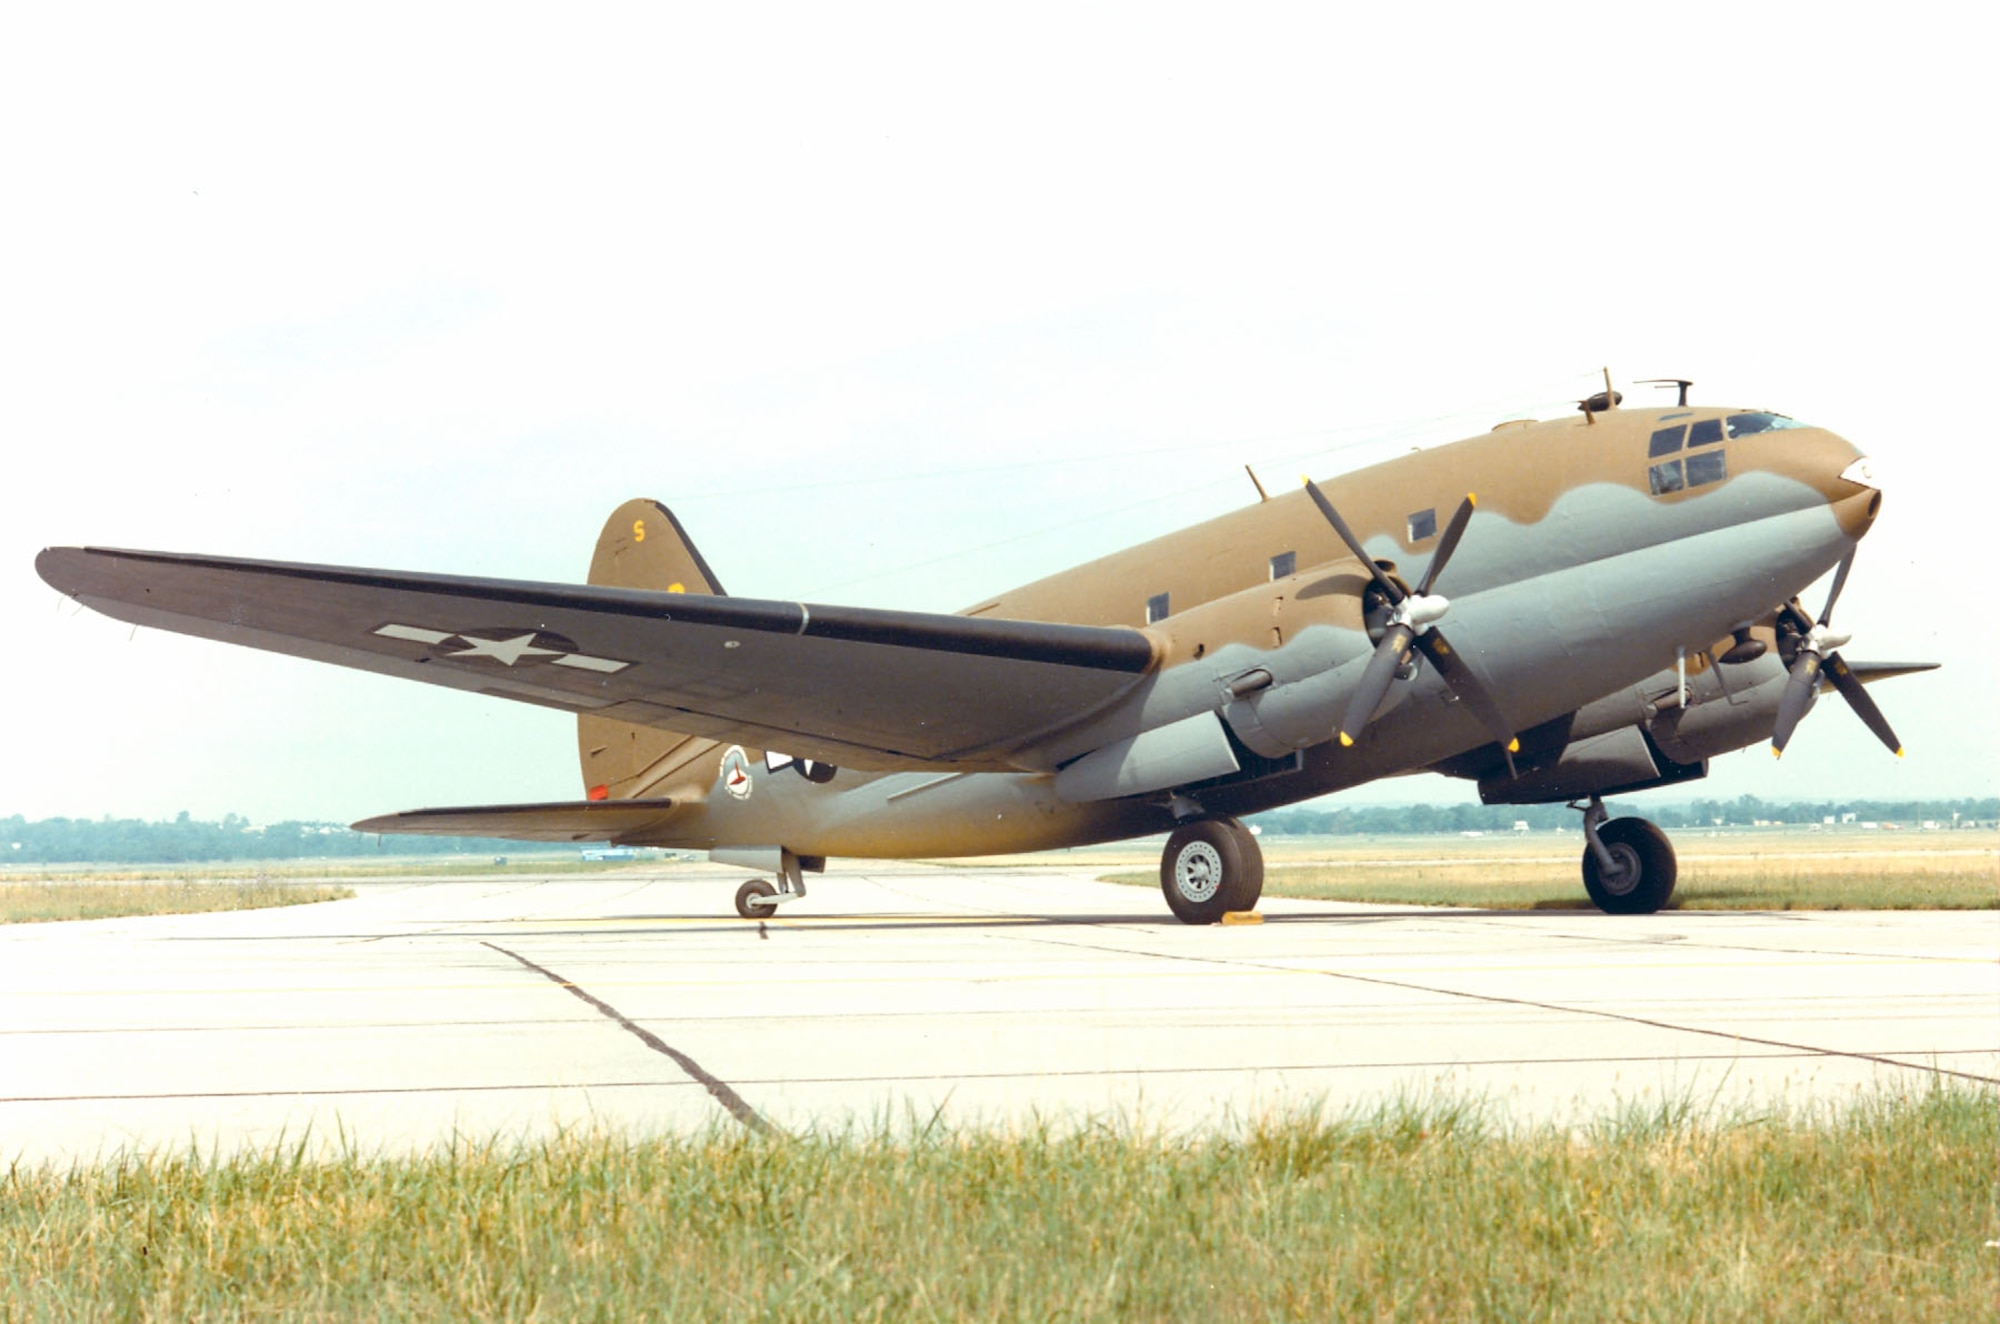 DAYTON, Ohio -- Curtiss C-46D Commando at the National Museum of the United States Air Force. (U.S. Air Force photo)